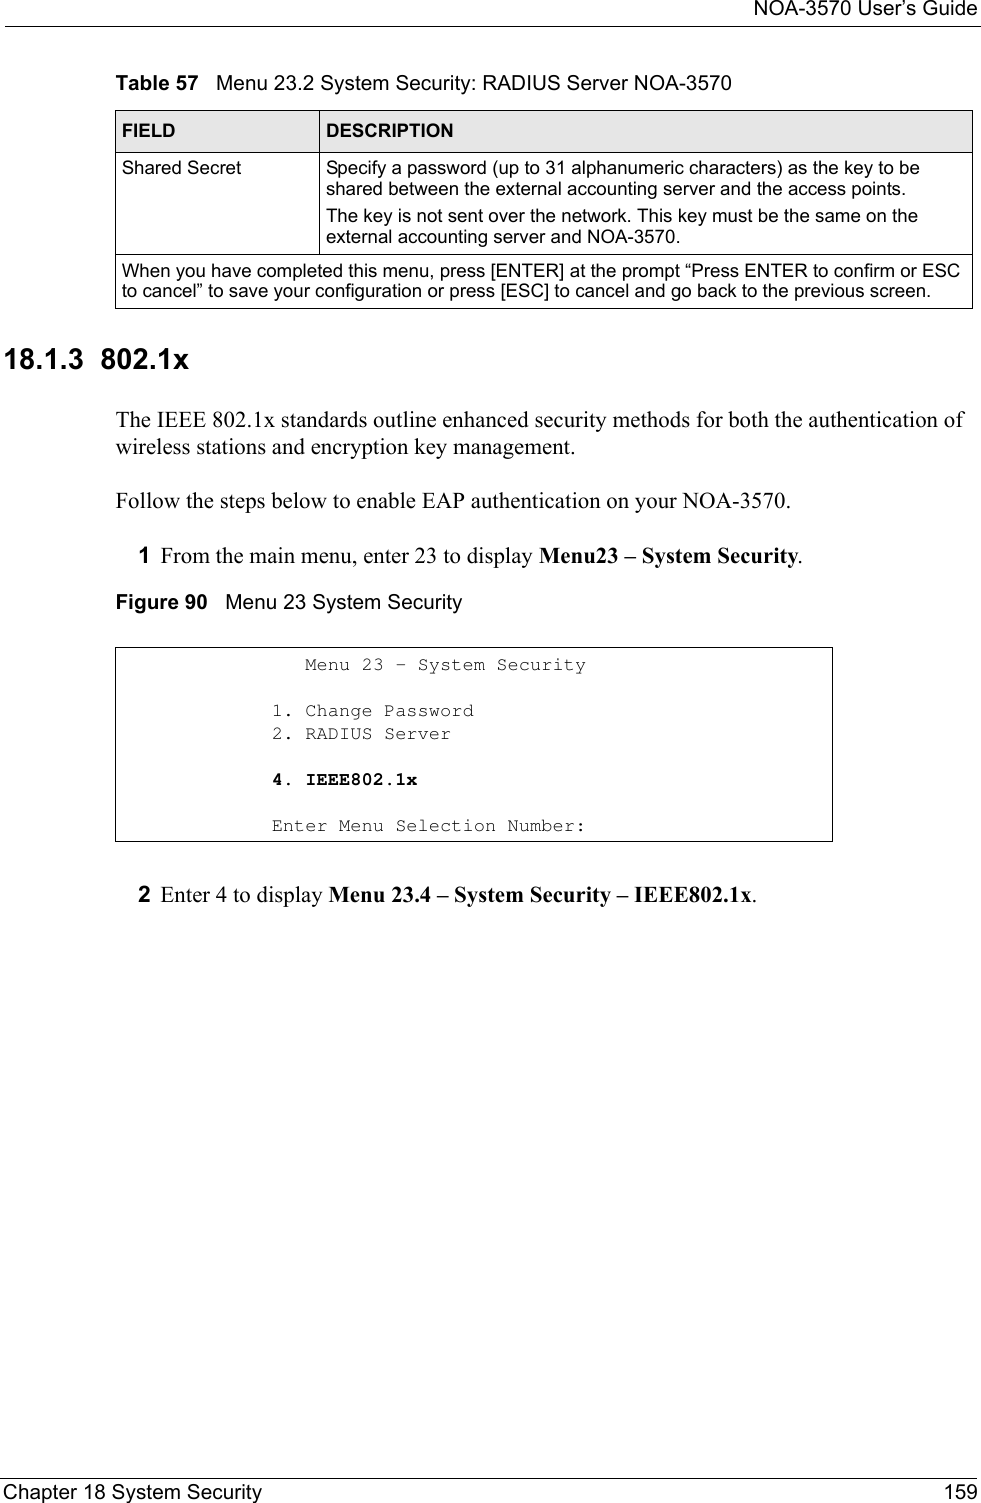 NOA-3570 User’s GuideChapter 18 System Security 15918.1.3  802.1x The IEEE 802.1x standards outline enhanced security methods for both the authentication of wireless stations and encryption key management.Follow the steps below to enable EAP authentication on your NOA-3570. 1From the main menu, enter 23 to display Menu23 – System Security.Figure 90   Menu 23 System Security2Enter 4 to display Menu 23.4 – System Security – IEEE802.1x.Shared Secret Specify a password (up to 31 alphanumeric characters) as the key to be shared between the external accounting server and the access points. The key is not sent over the network. This key must be the same on the external accounting server and NOA-3570.When you have completed this menu, press [ENTER] at the prompt “Press ENTER to confirm or ESC to cancel” to save your configuration or press [ESC] to cancel and go back to the previous screen.Table 57   Menu 23.2 System Security: RADIUS Server NOA-3570FIELD DESCRIPTION   Menu 23 - System Security1. Change Password2. RADIUS Server4. IEEE802.1xEnter Menu Selection Number: